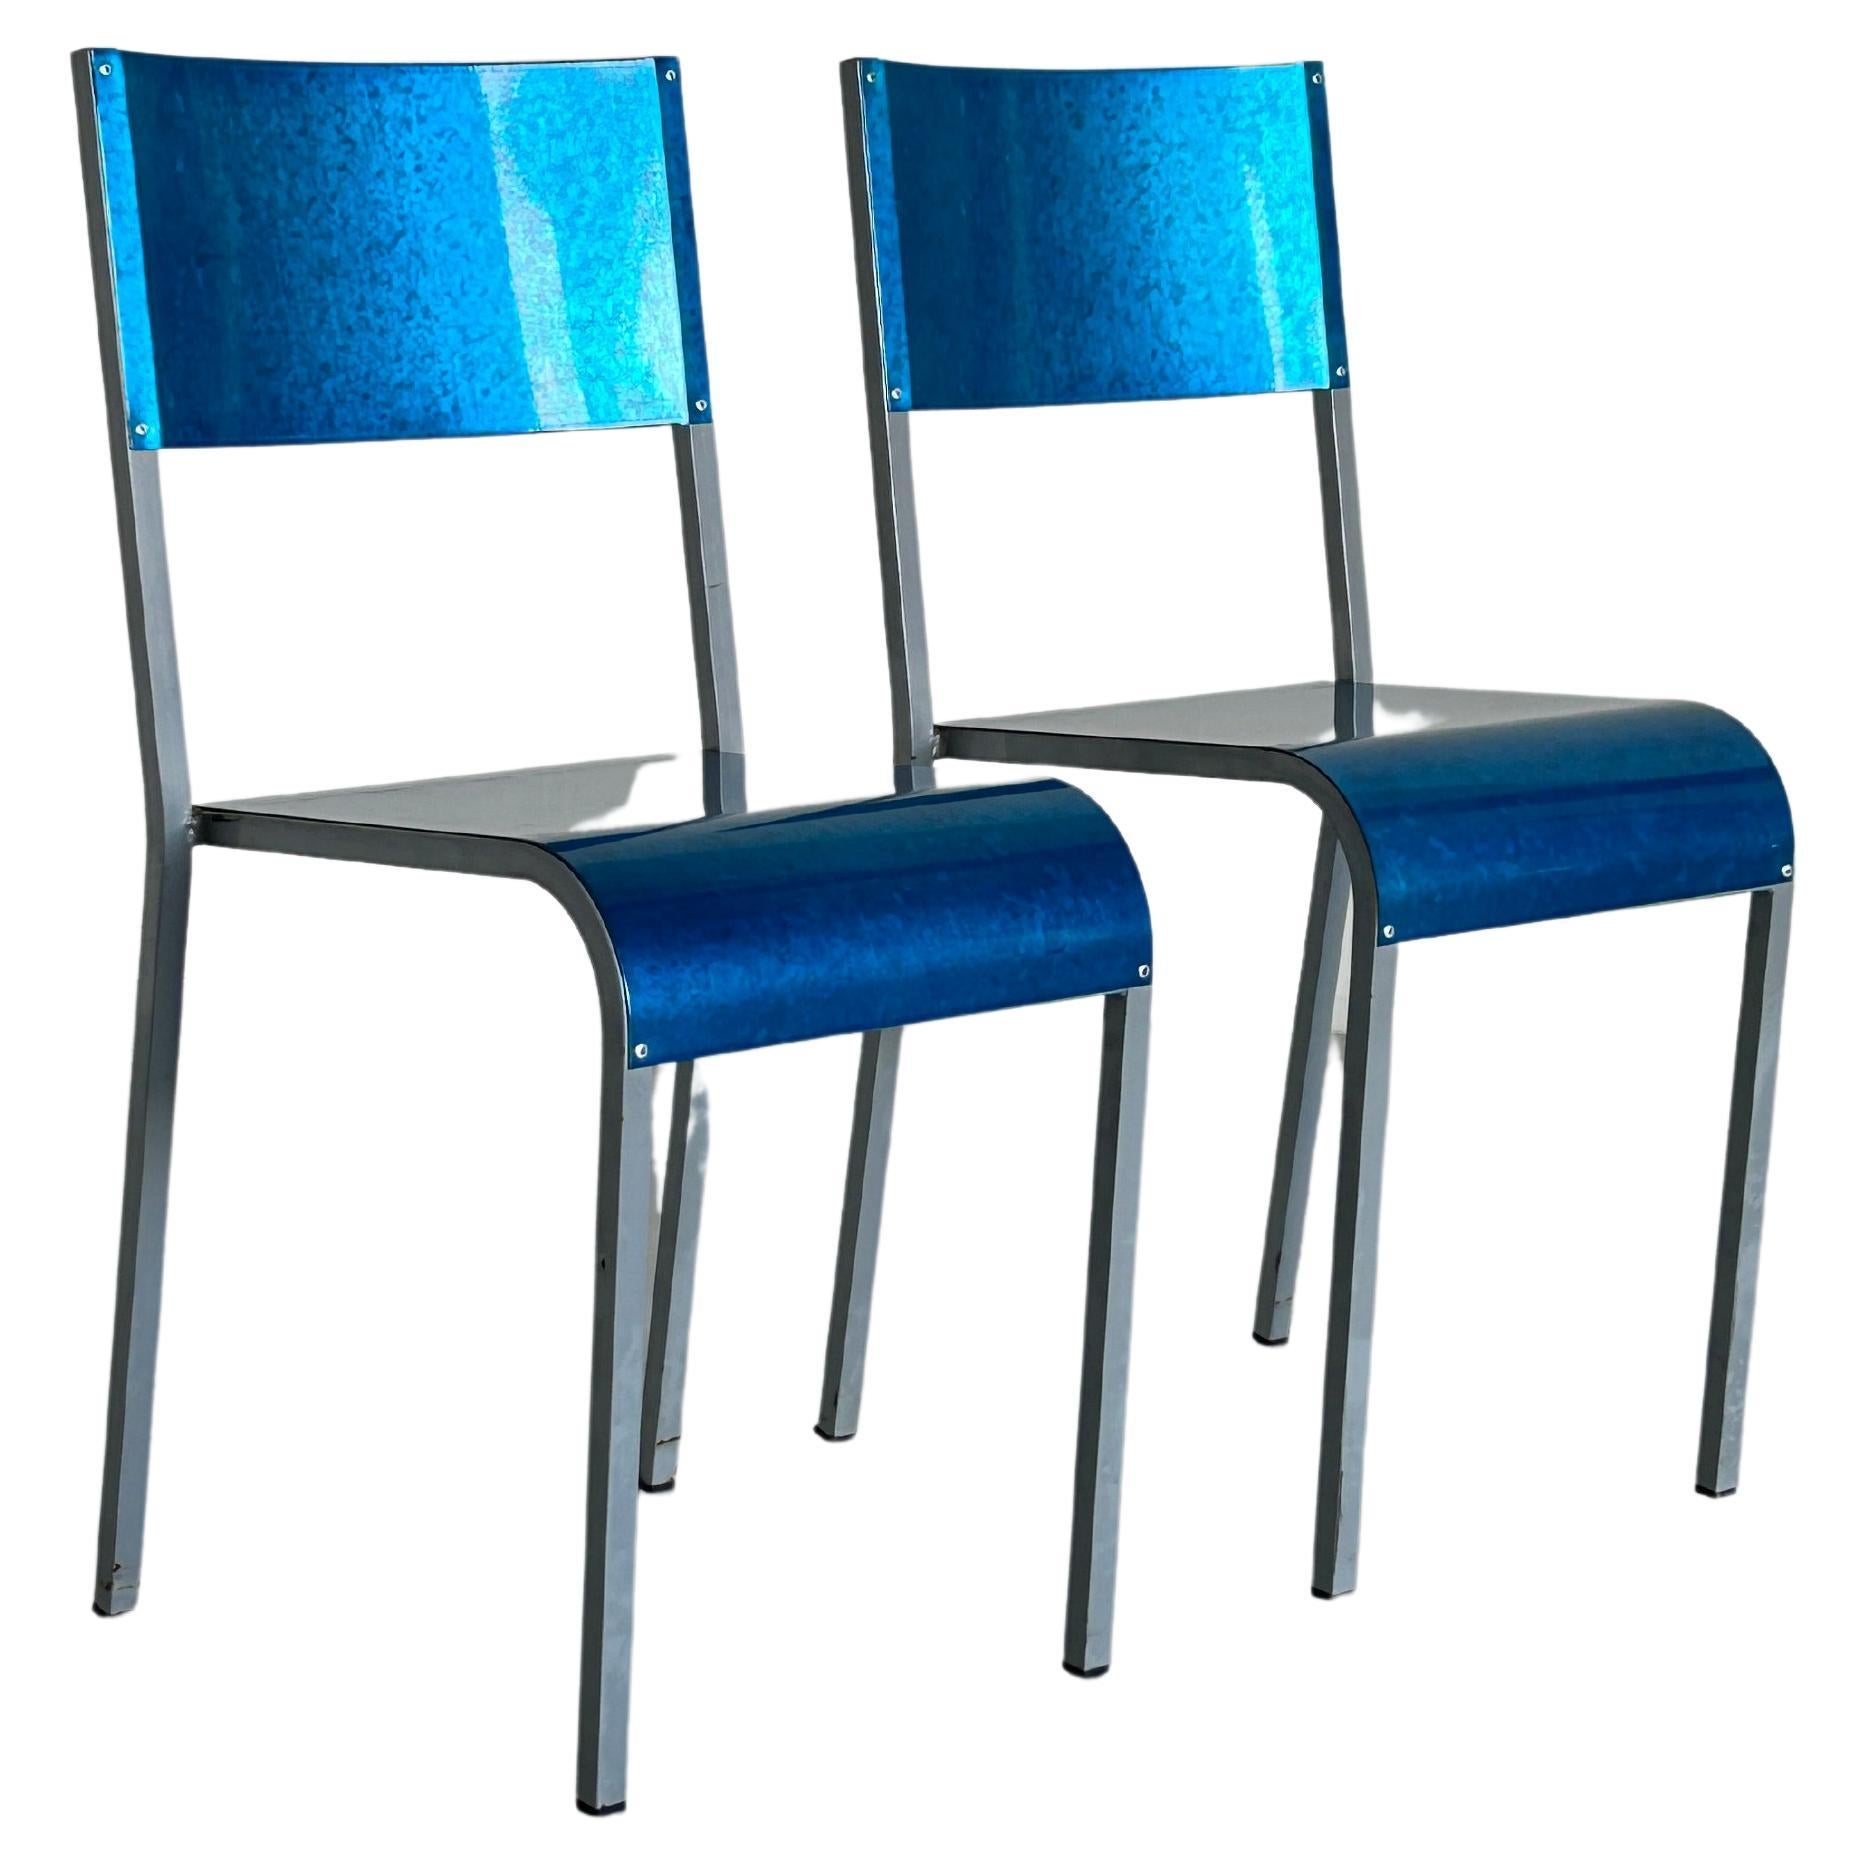 Pair of Blue Postmodern Industrial Metal Dining Chairs by Parisotto, 1980s Italy For Sale